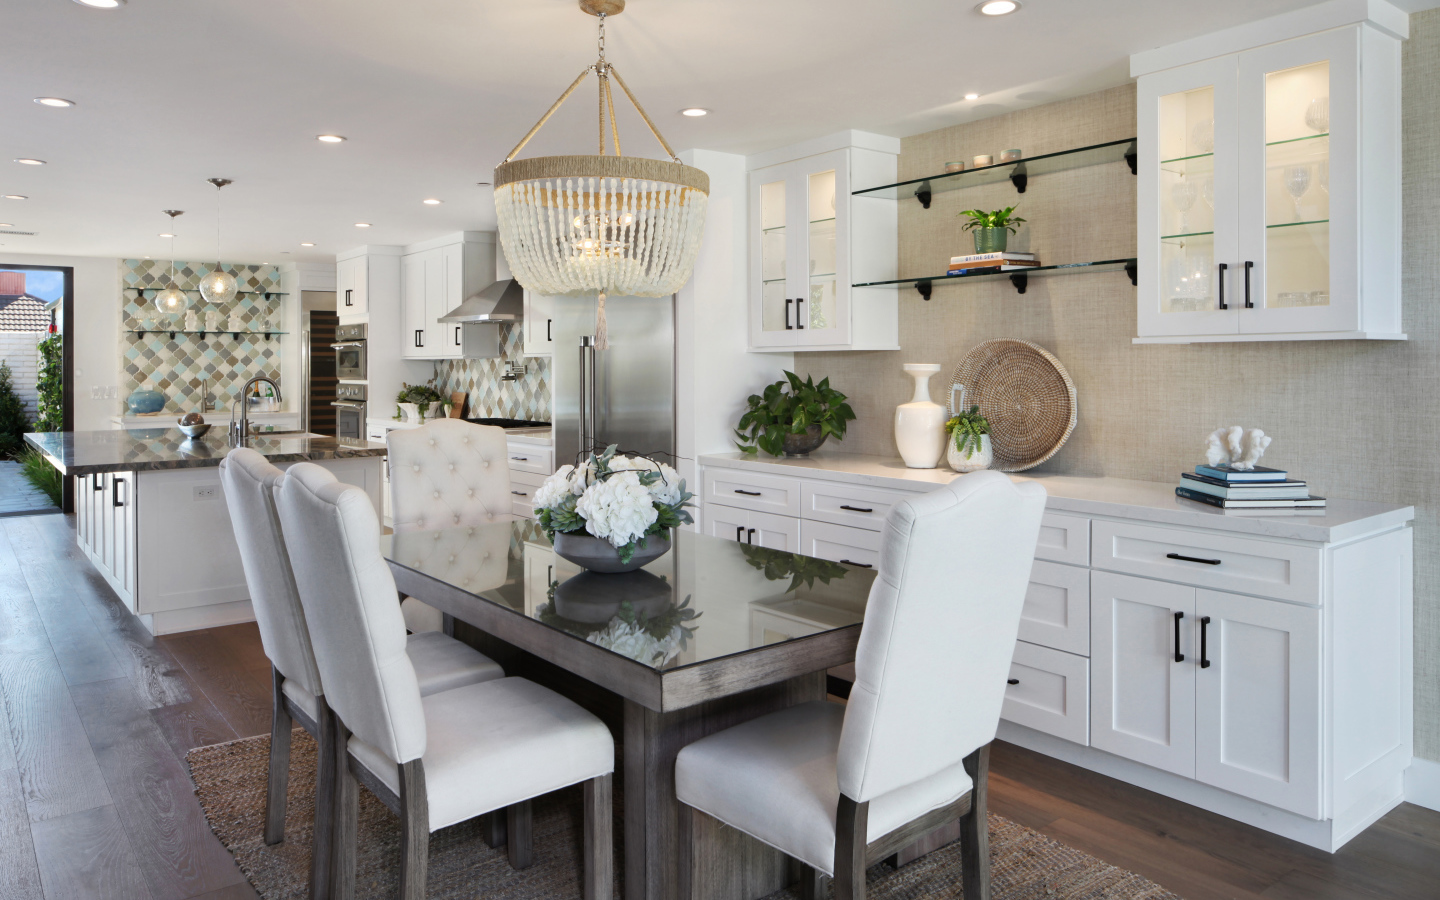 Kitchen with dining area with white furniture